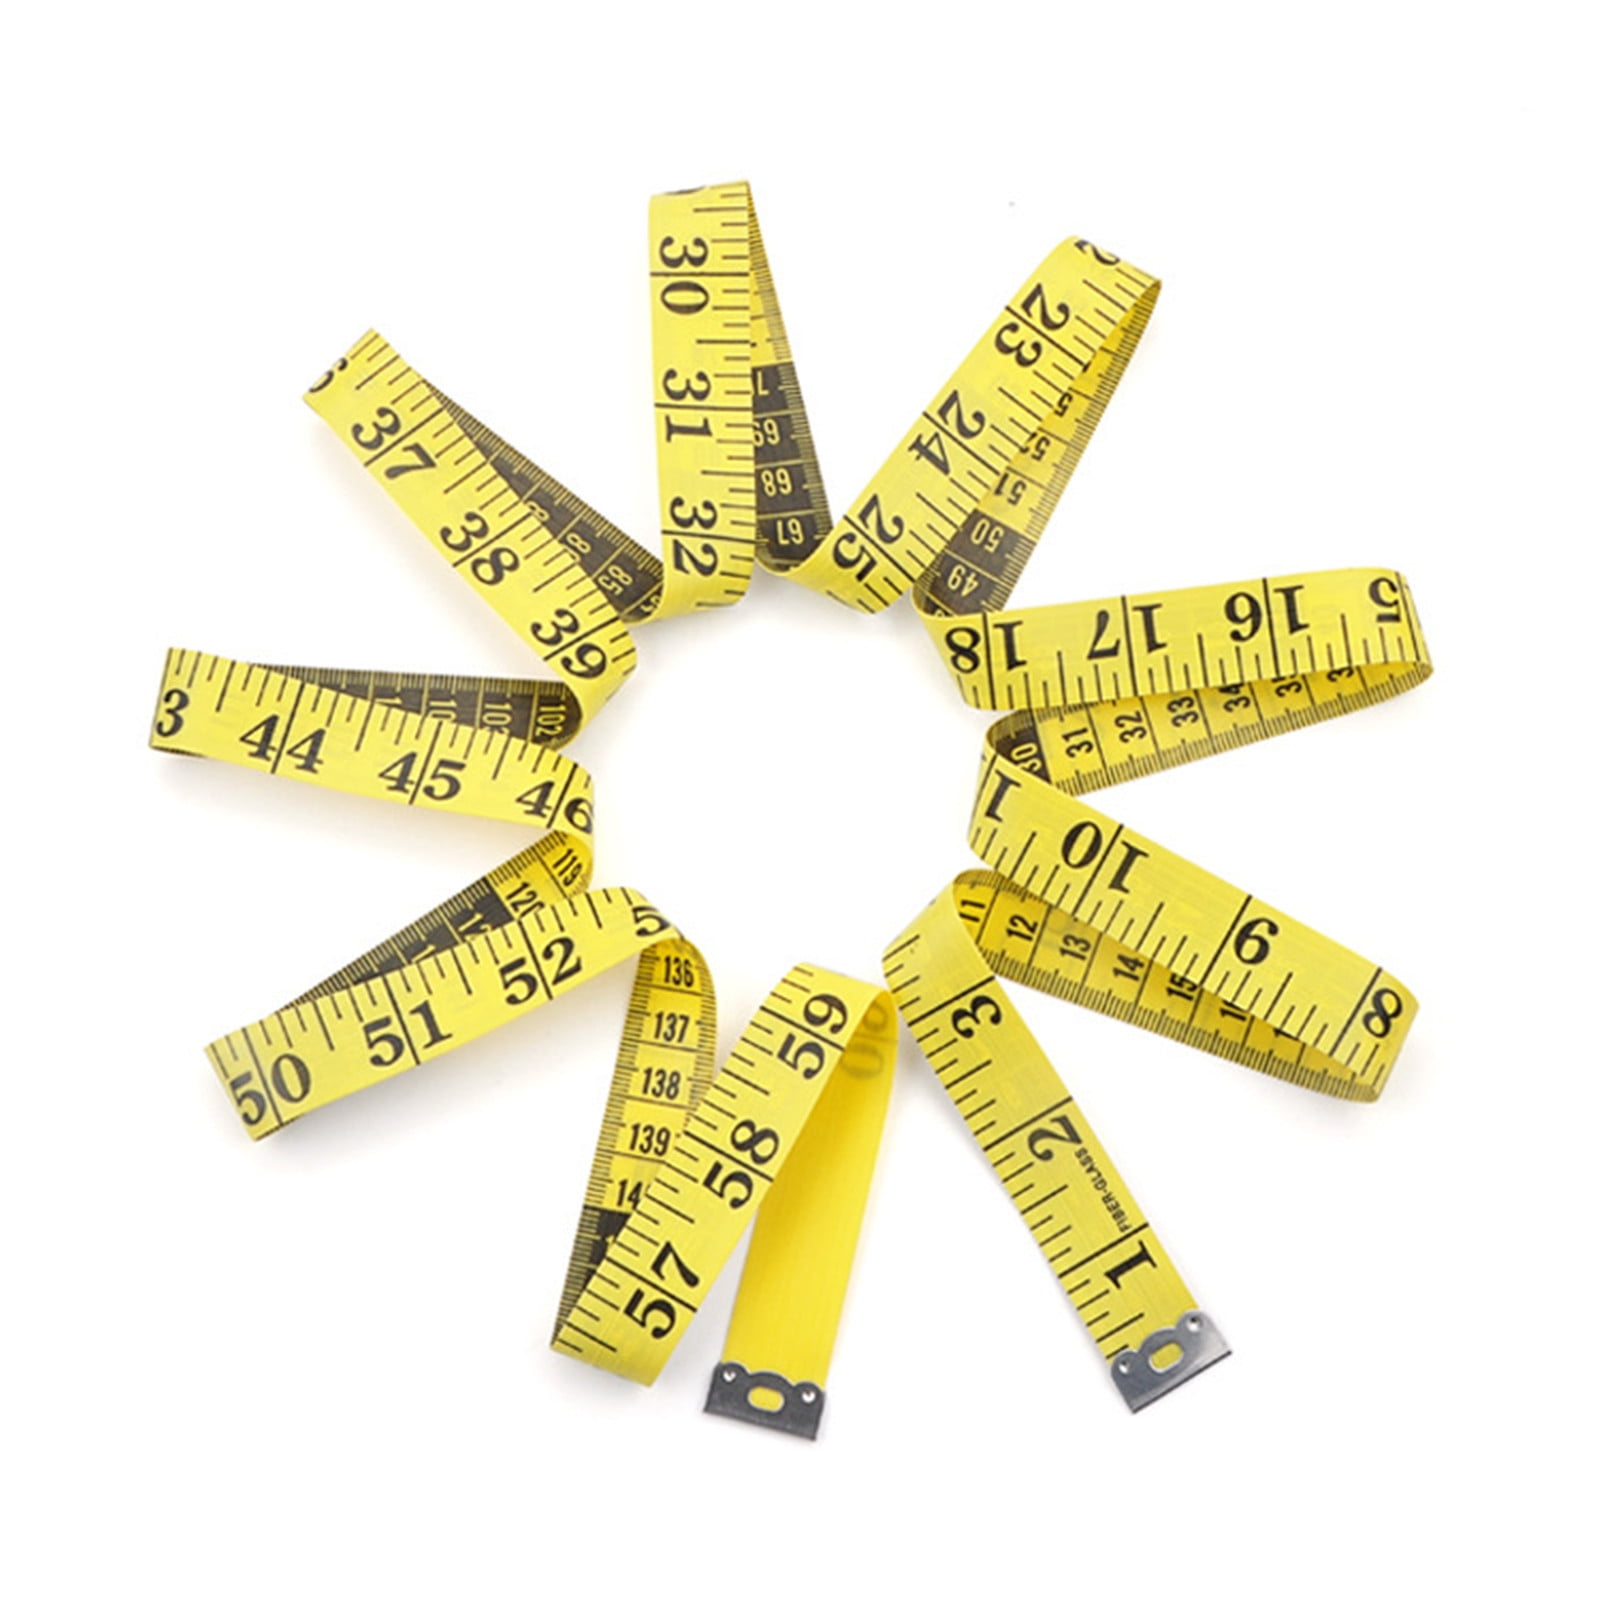 SOFT TAPE MEASURE - 60 INCH — YARNS, PATTERNS, ACCESSORIES